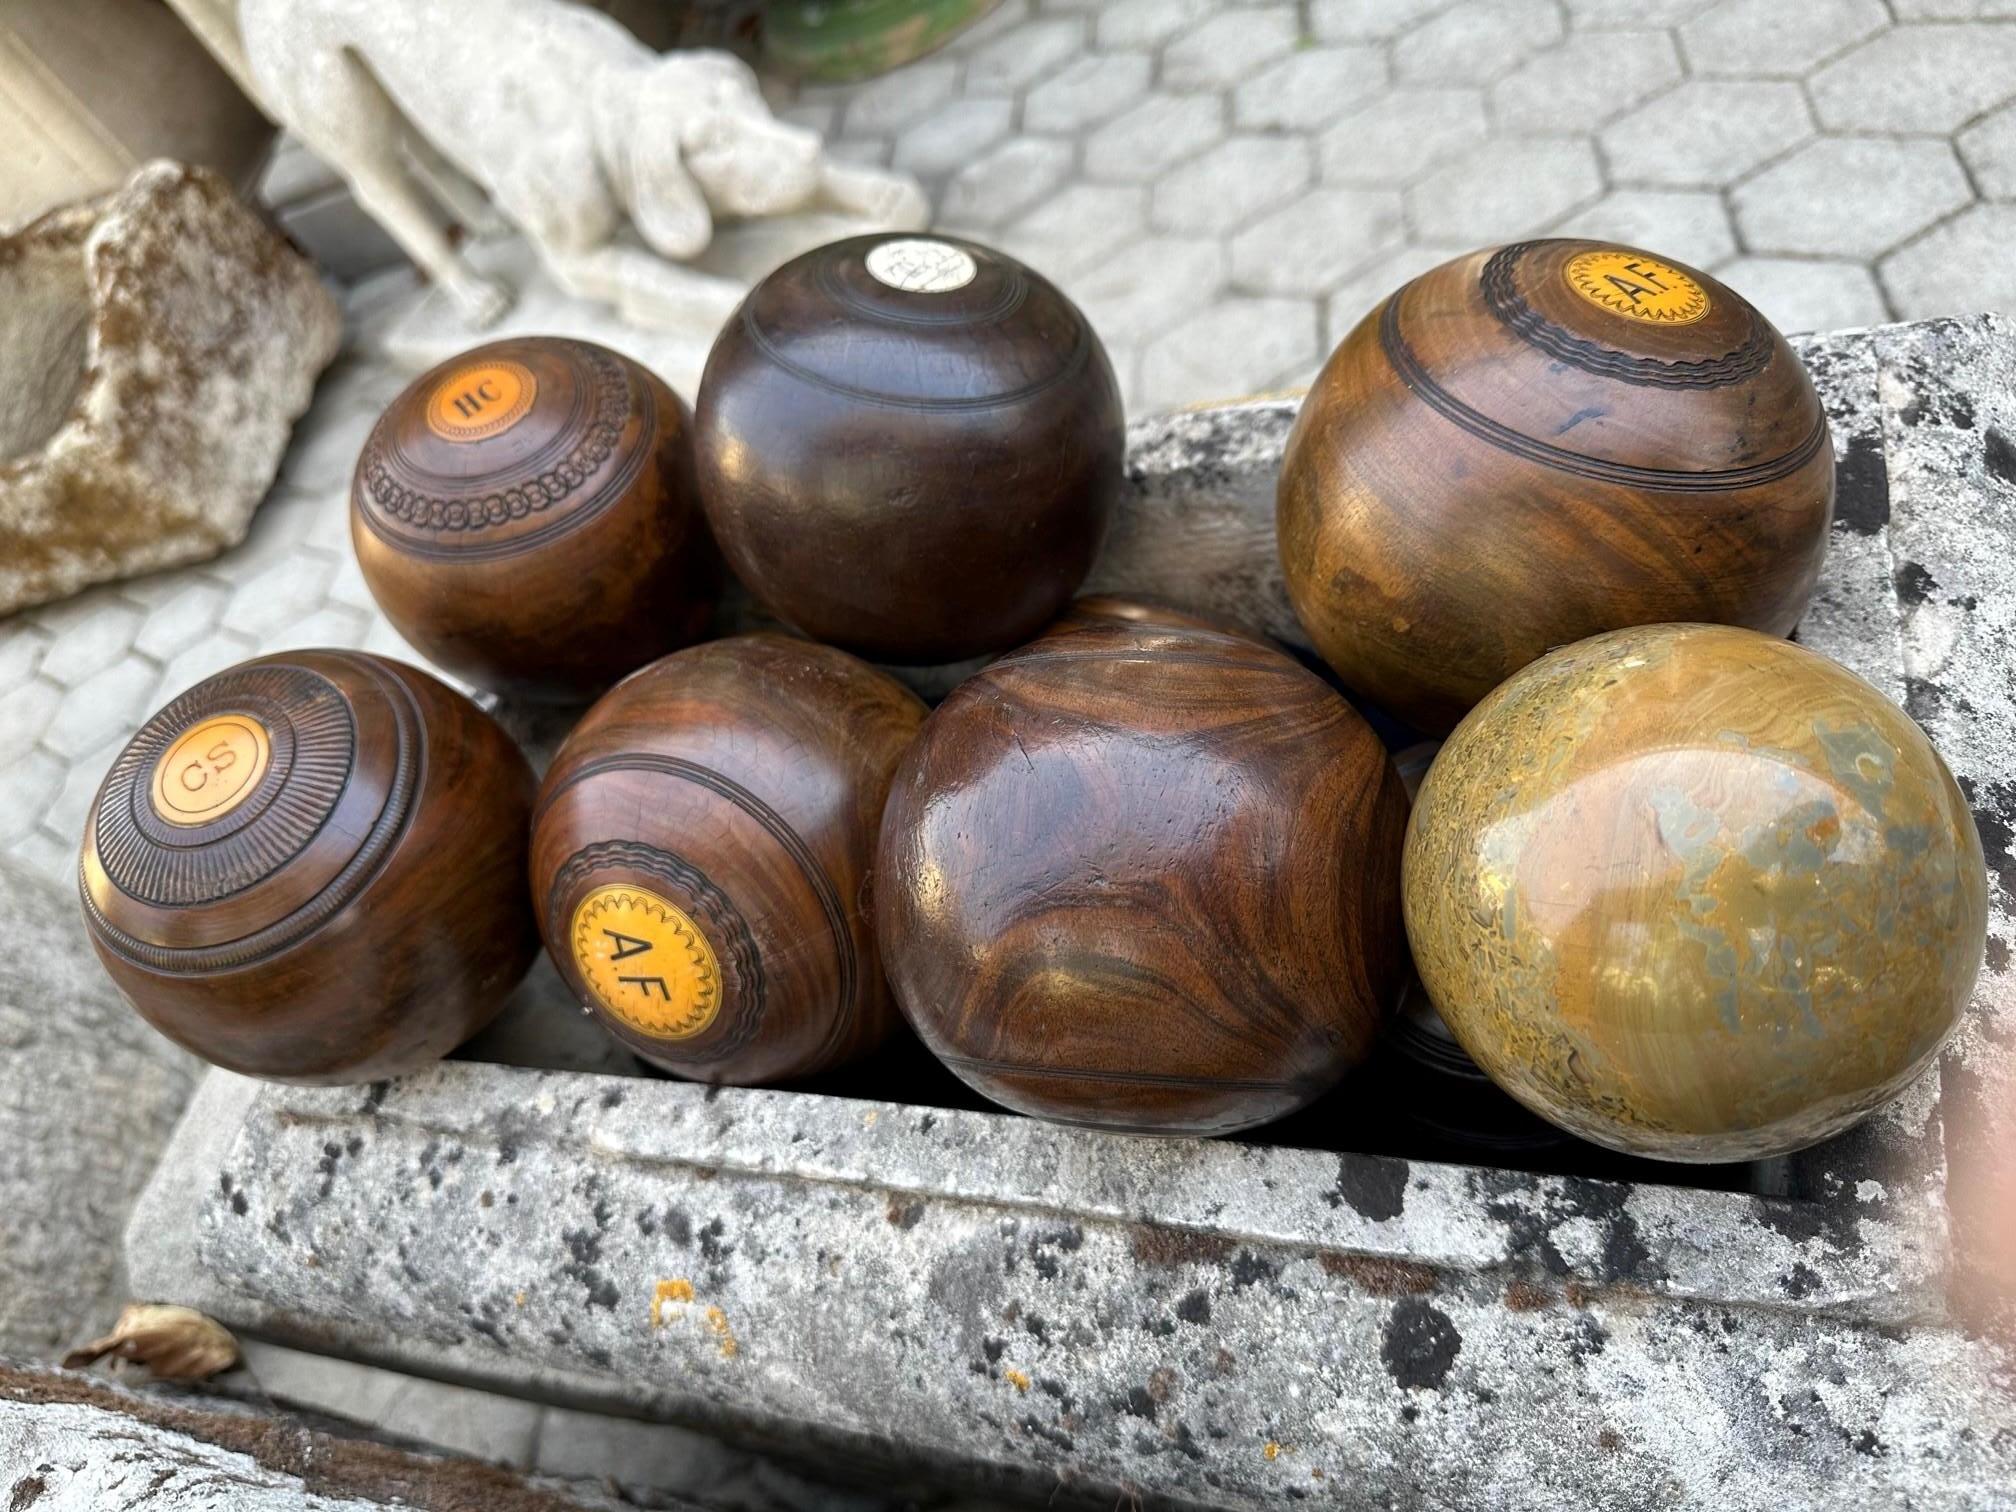 10 Carpet Lawn Bowling Hand Carved Wood & Stone Balls Antique Office Gift Idea For Sale 9